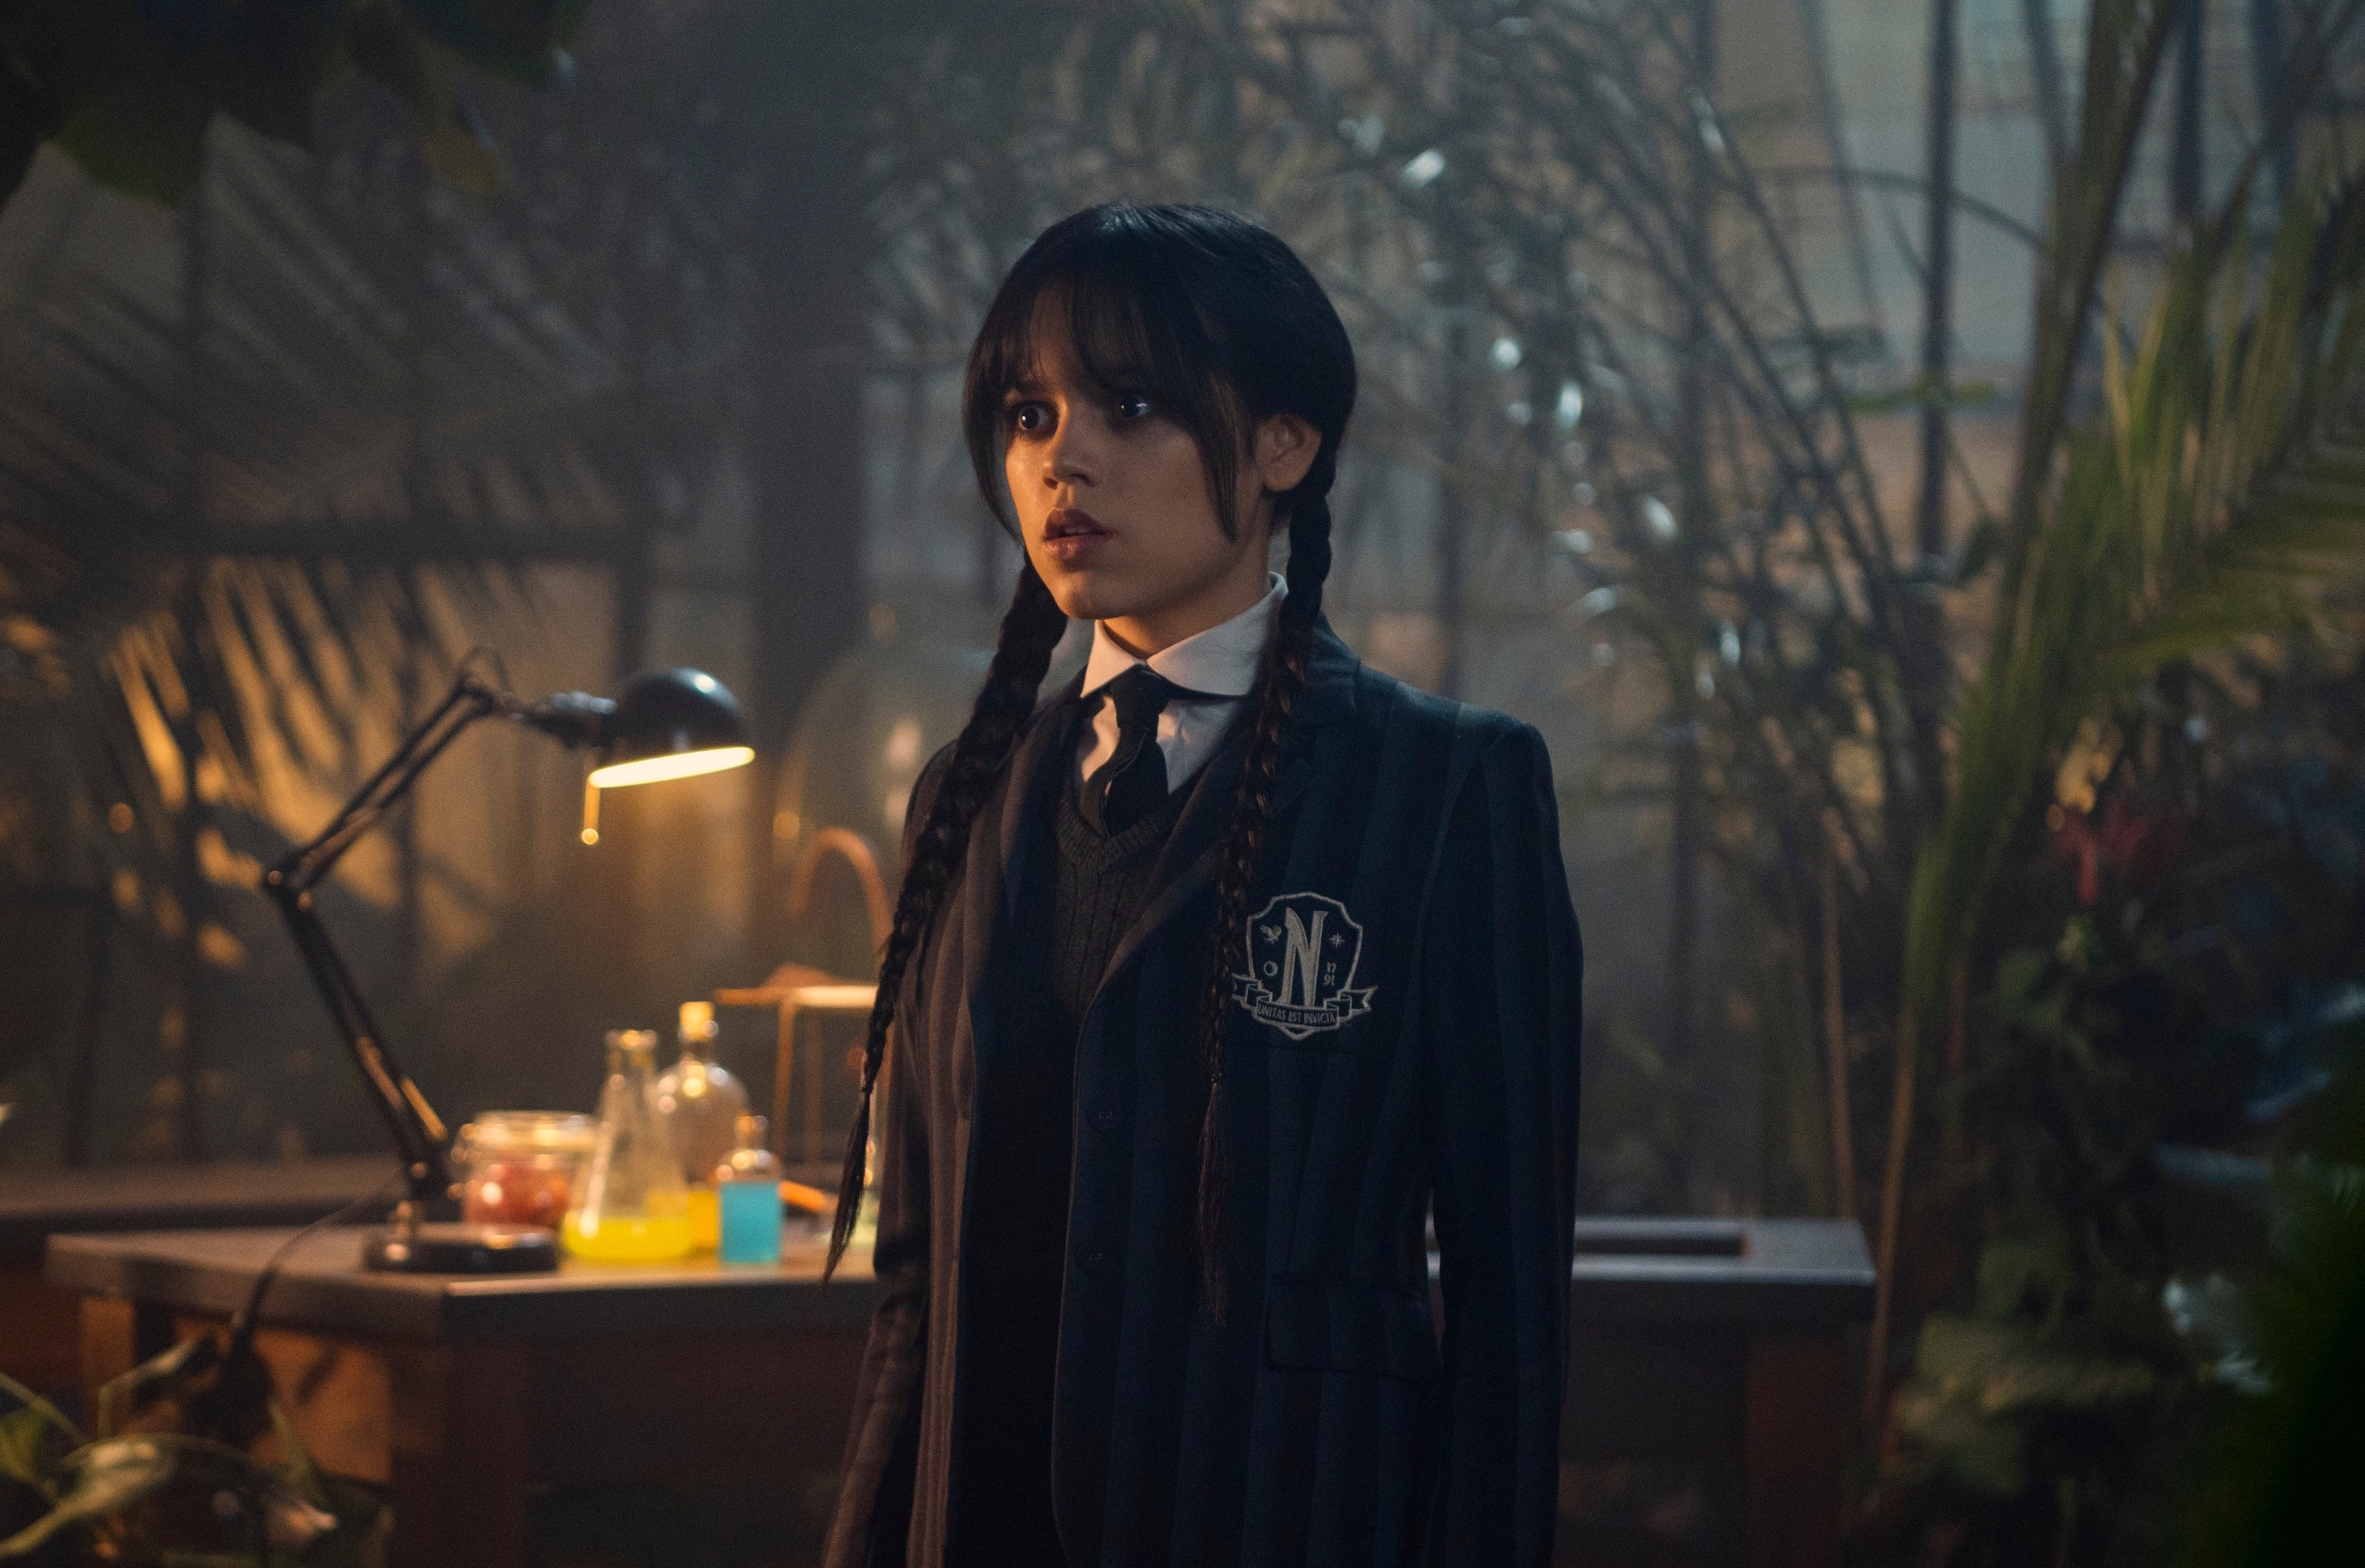 Did You Know You Can Visit Nevermore Academy from Netflix's 'Wednesday'?